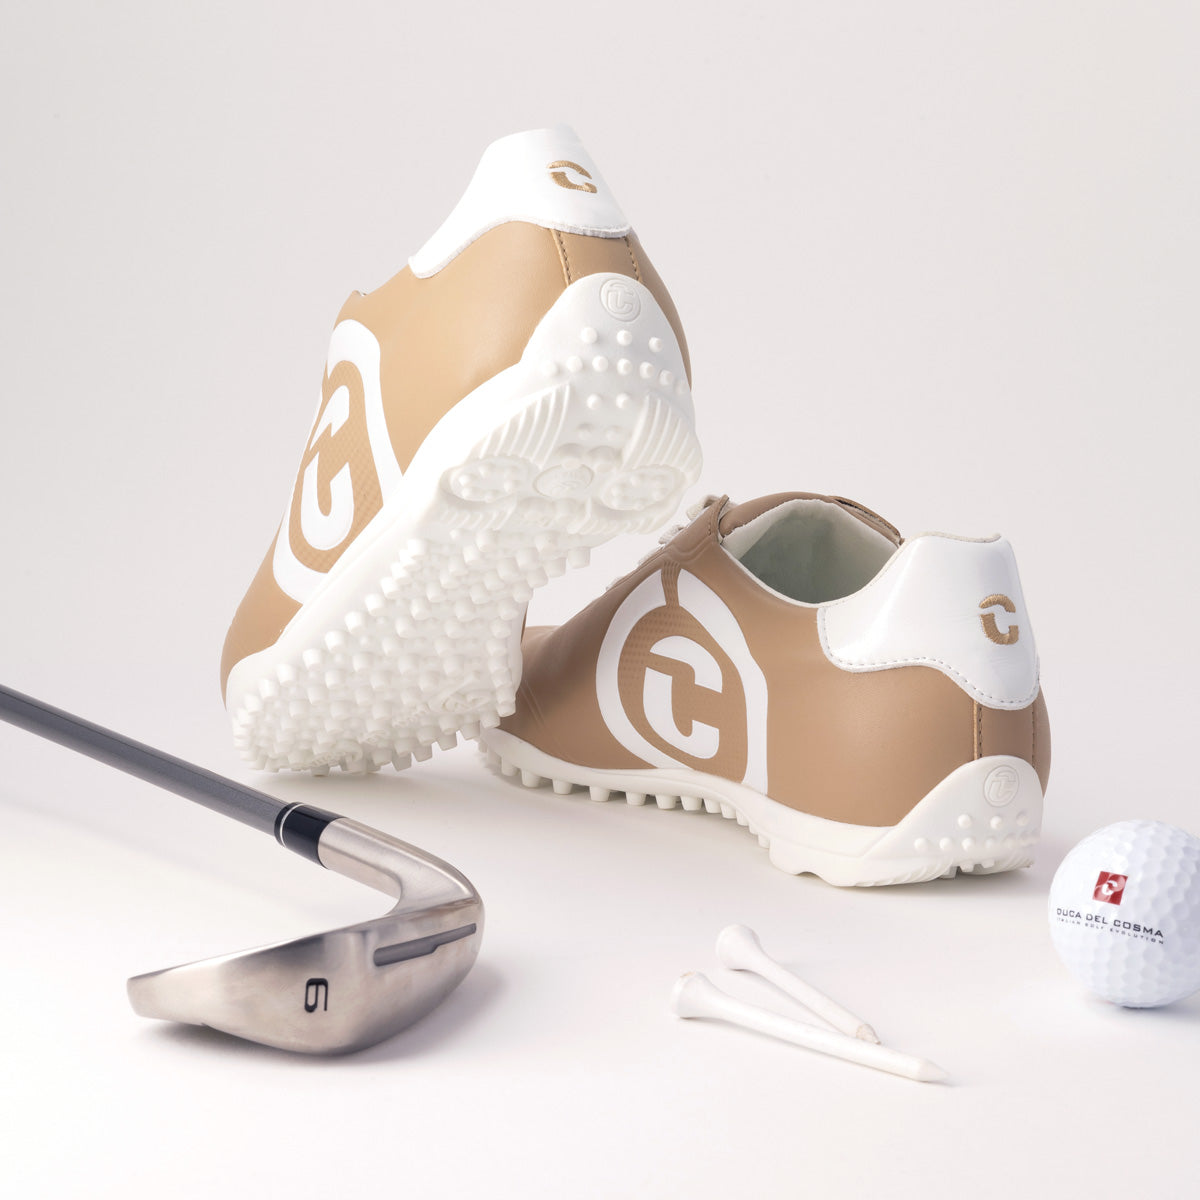 Queenscup Champagne/White - Women's Golf Shoe  